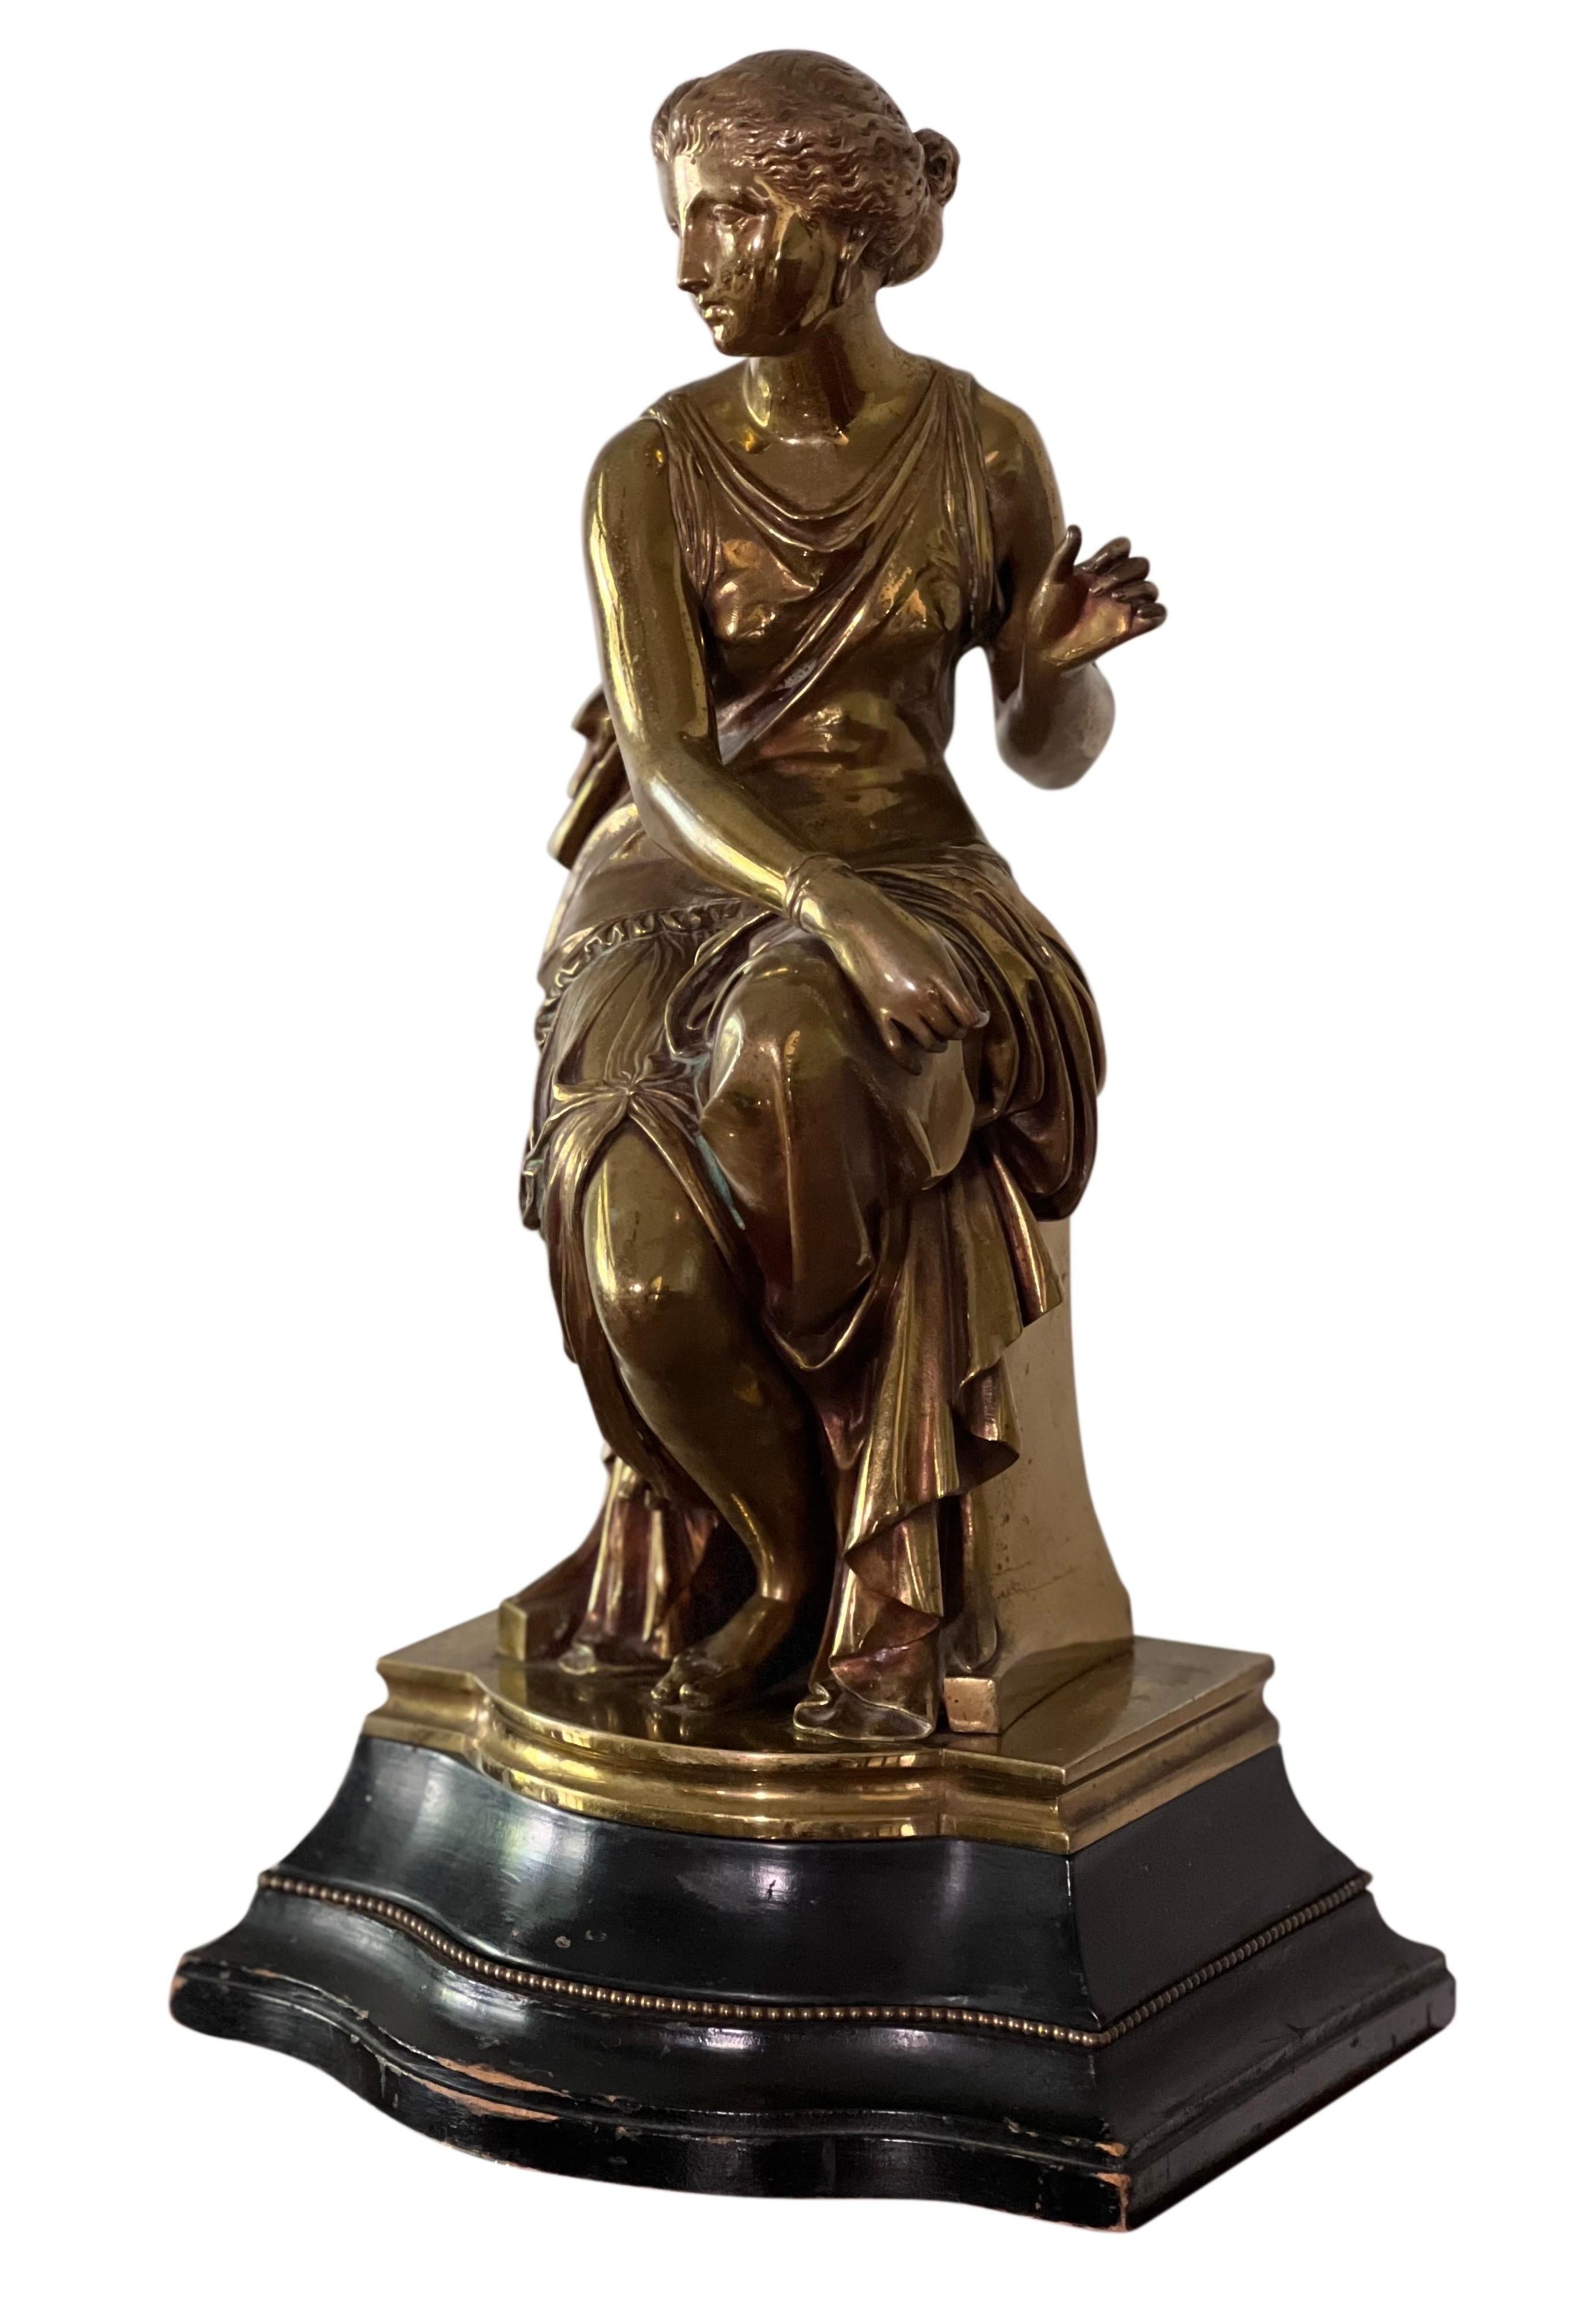 Magnificent patinated bronze sculpture by Auguste Joseph Peiffer, 19th Century, signed.

The piece features a seated maiden draped in Classical Greek attire. It is mounted on an elegant curved wood base accented with decorative bead trim. The bronze